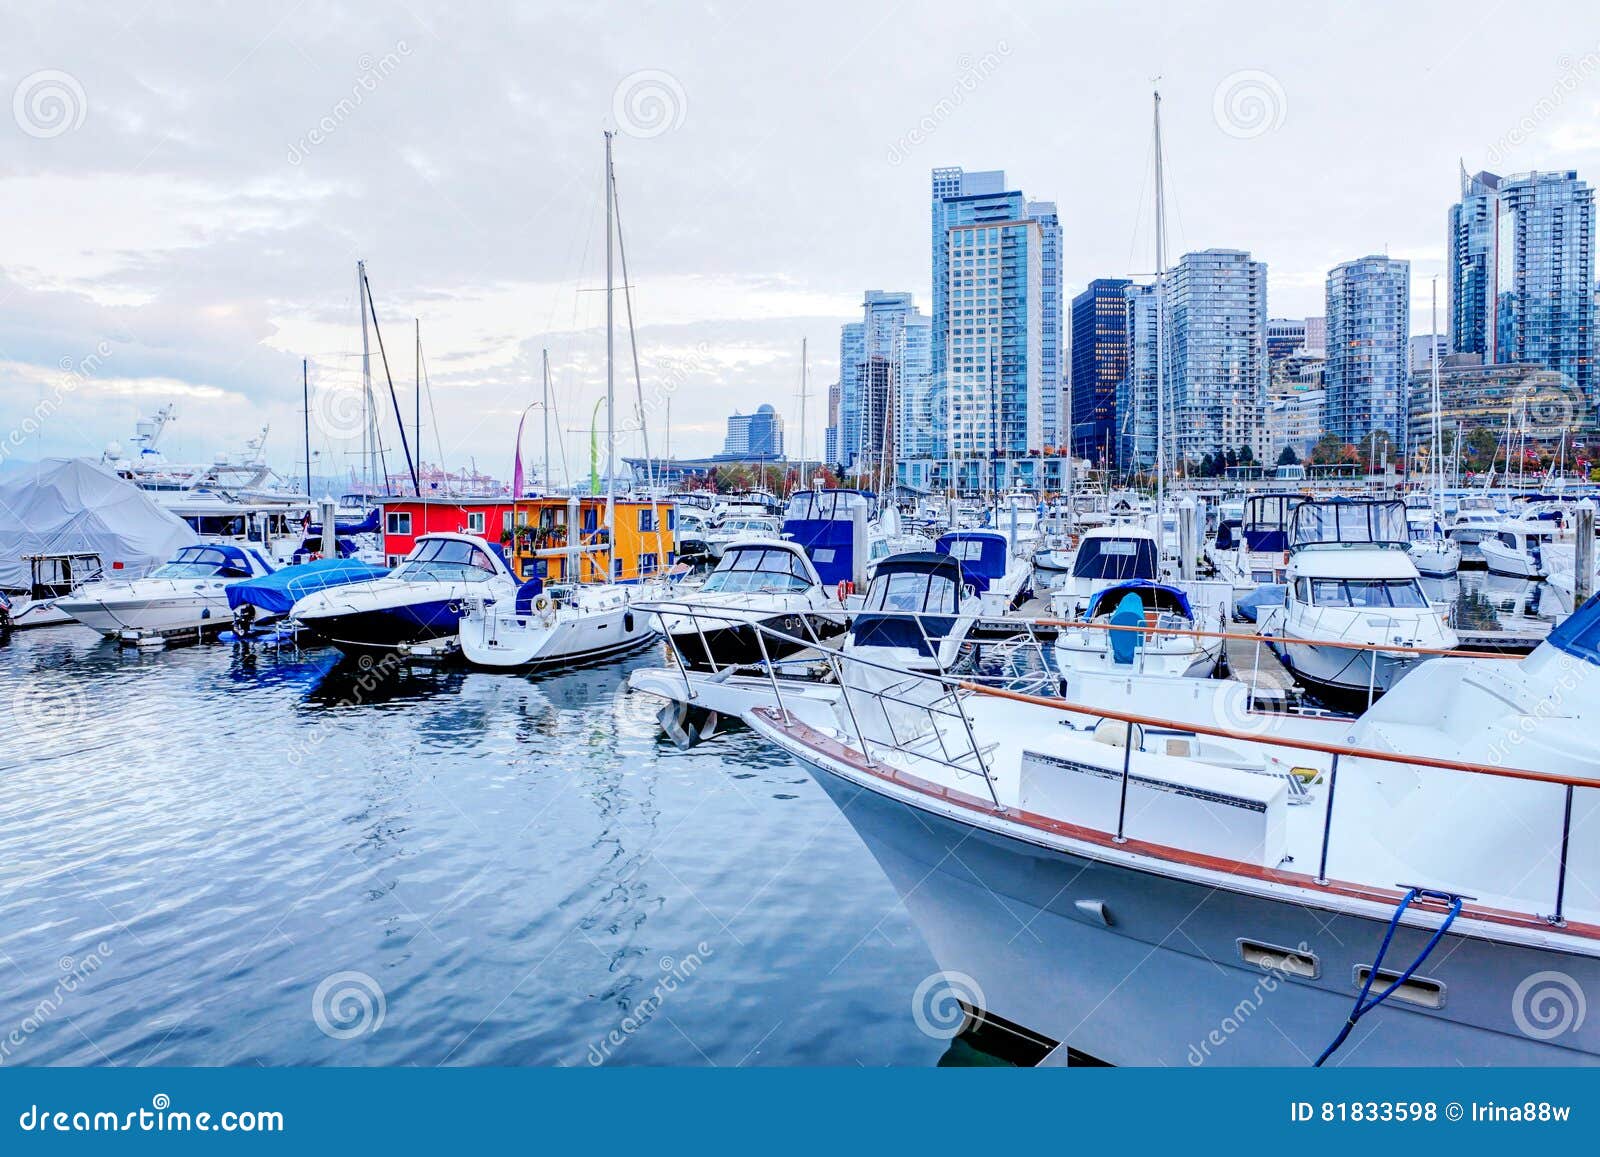 moored yachts and marina at coal harbour in vancouver, canada